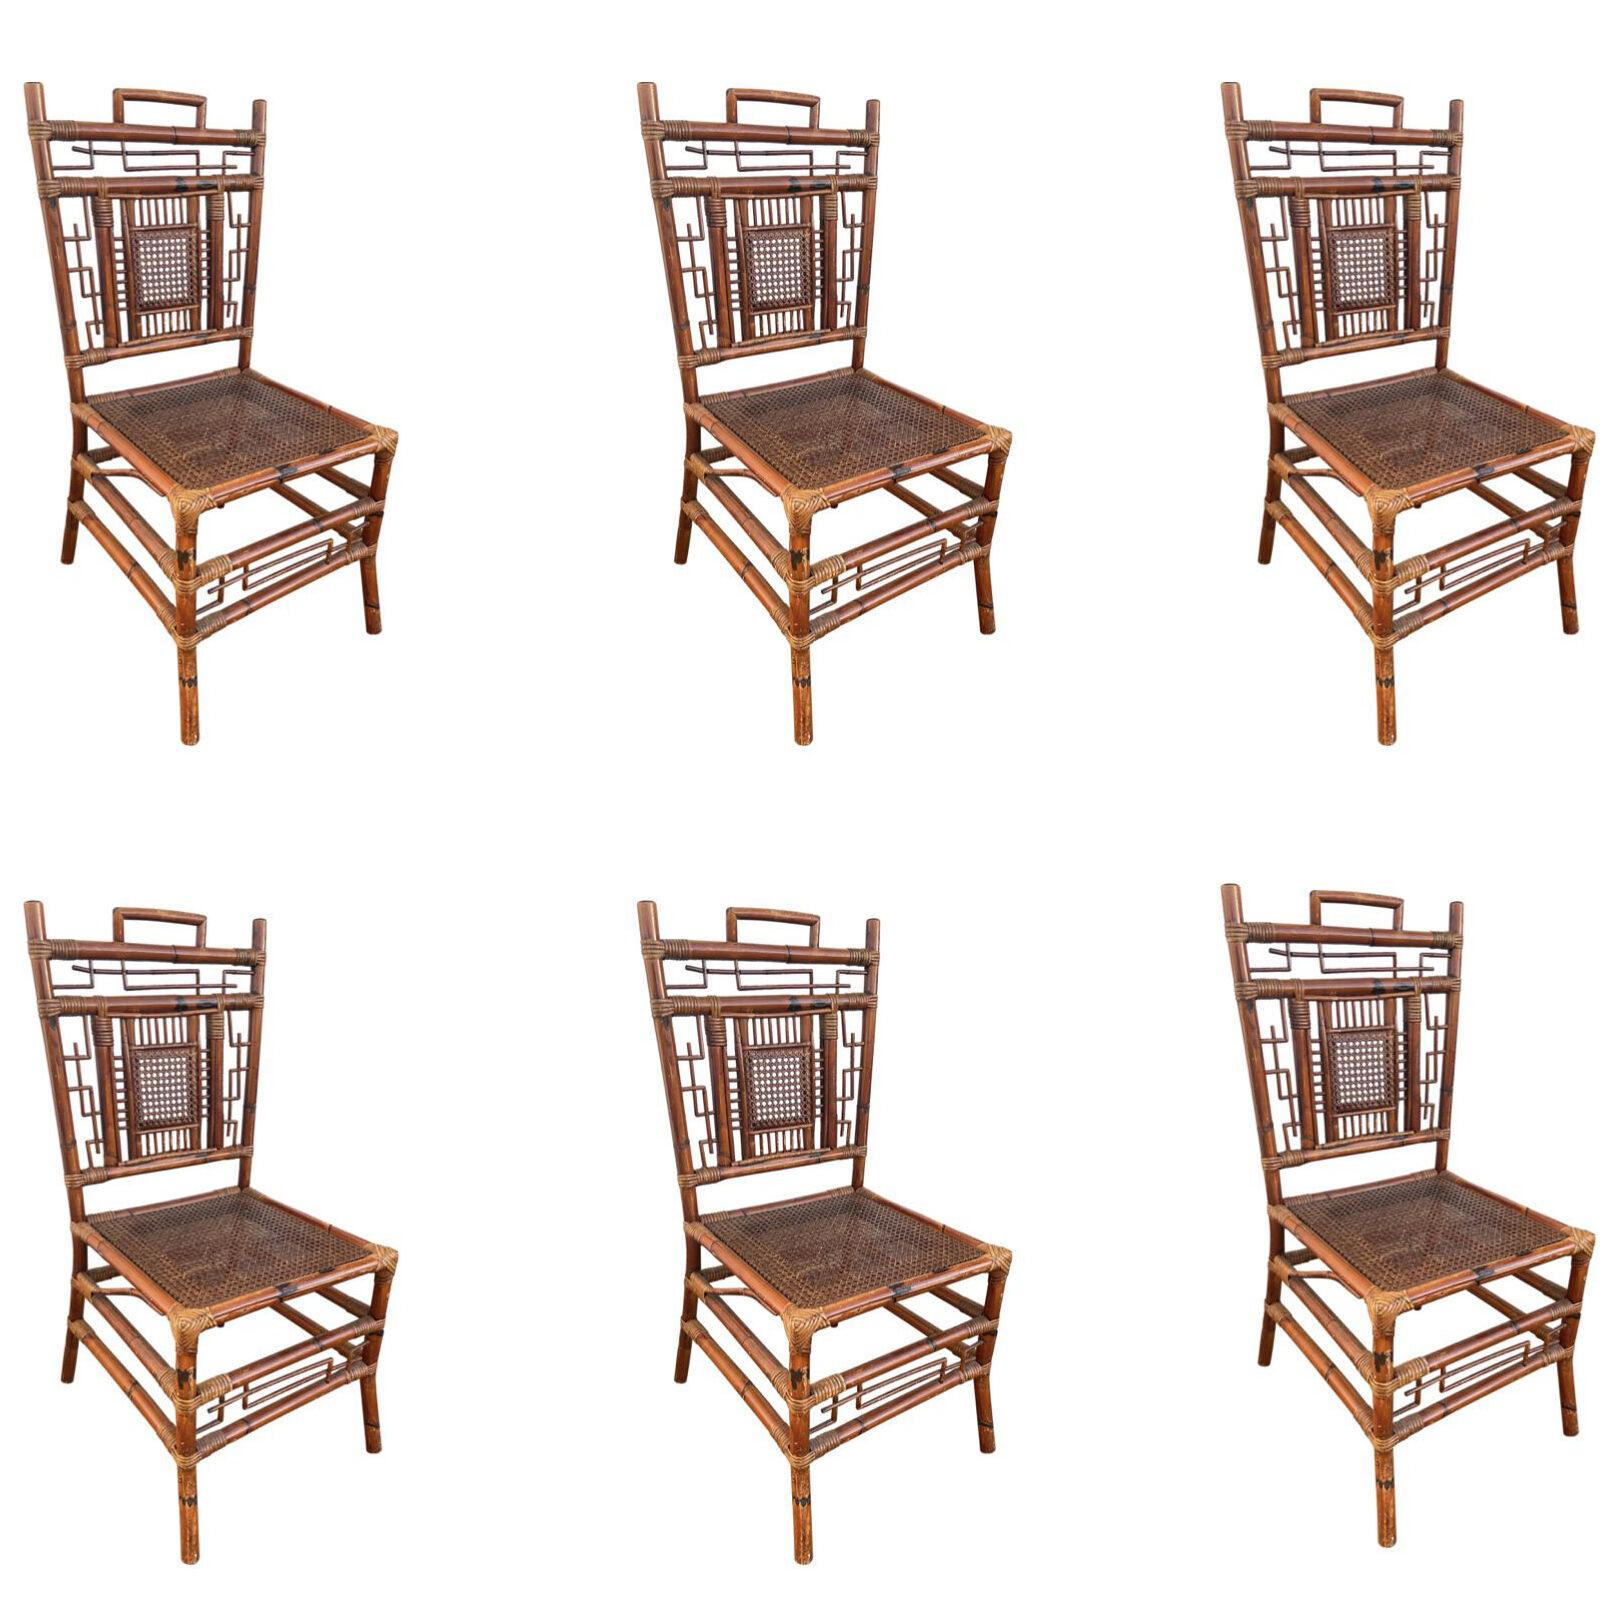 A set of six 1920s Chinoiserie French bamboo dining chairs